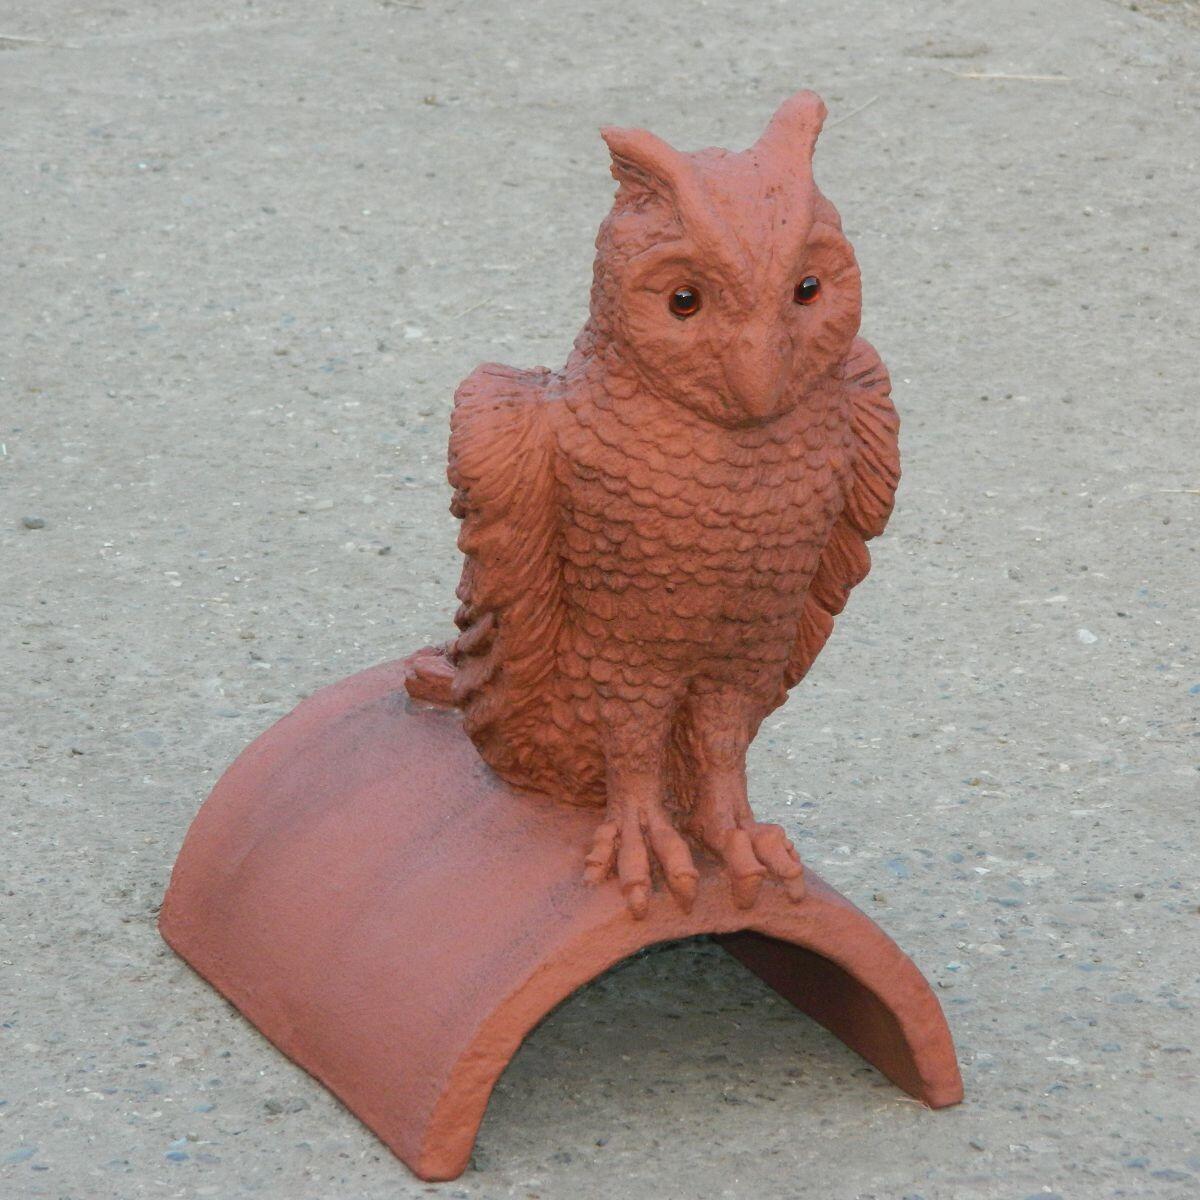 Owl roof finial ornament with eyes made of brown glass